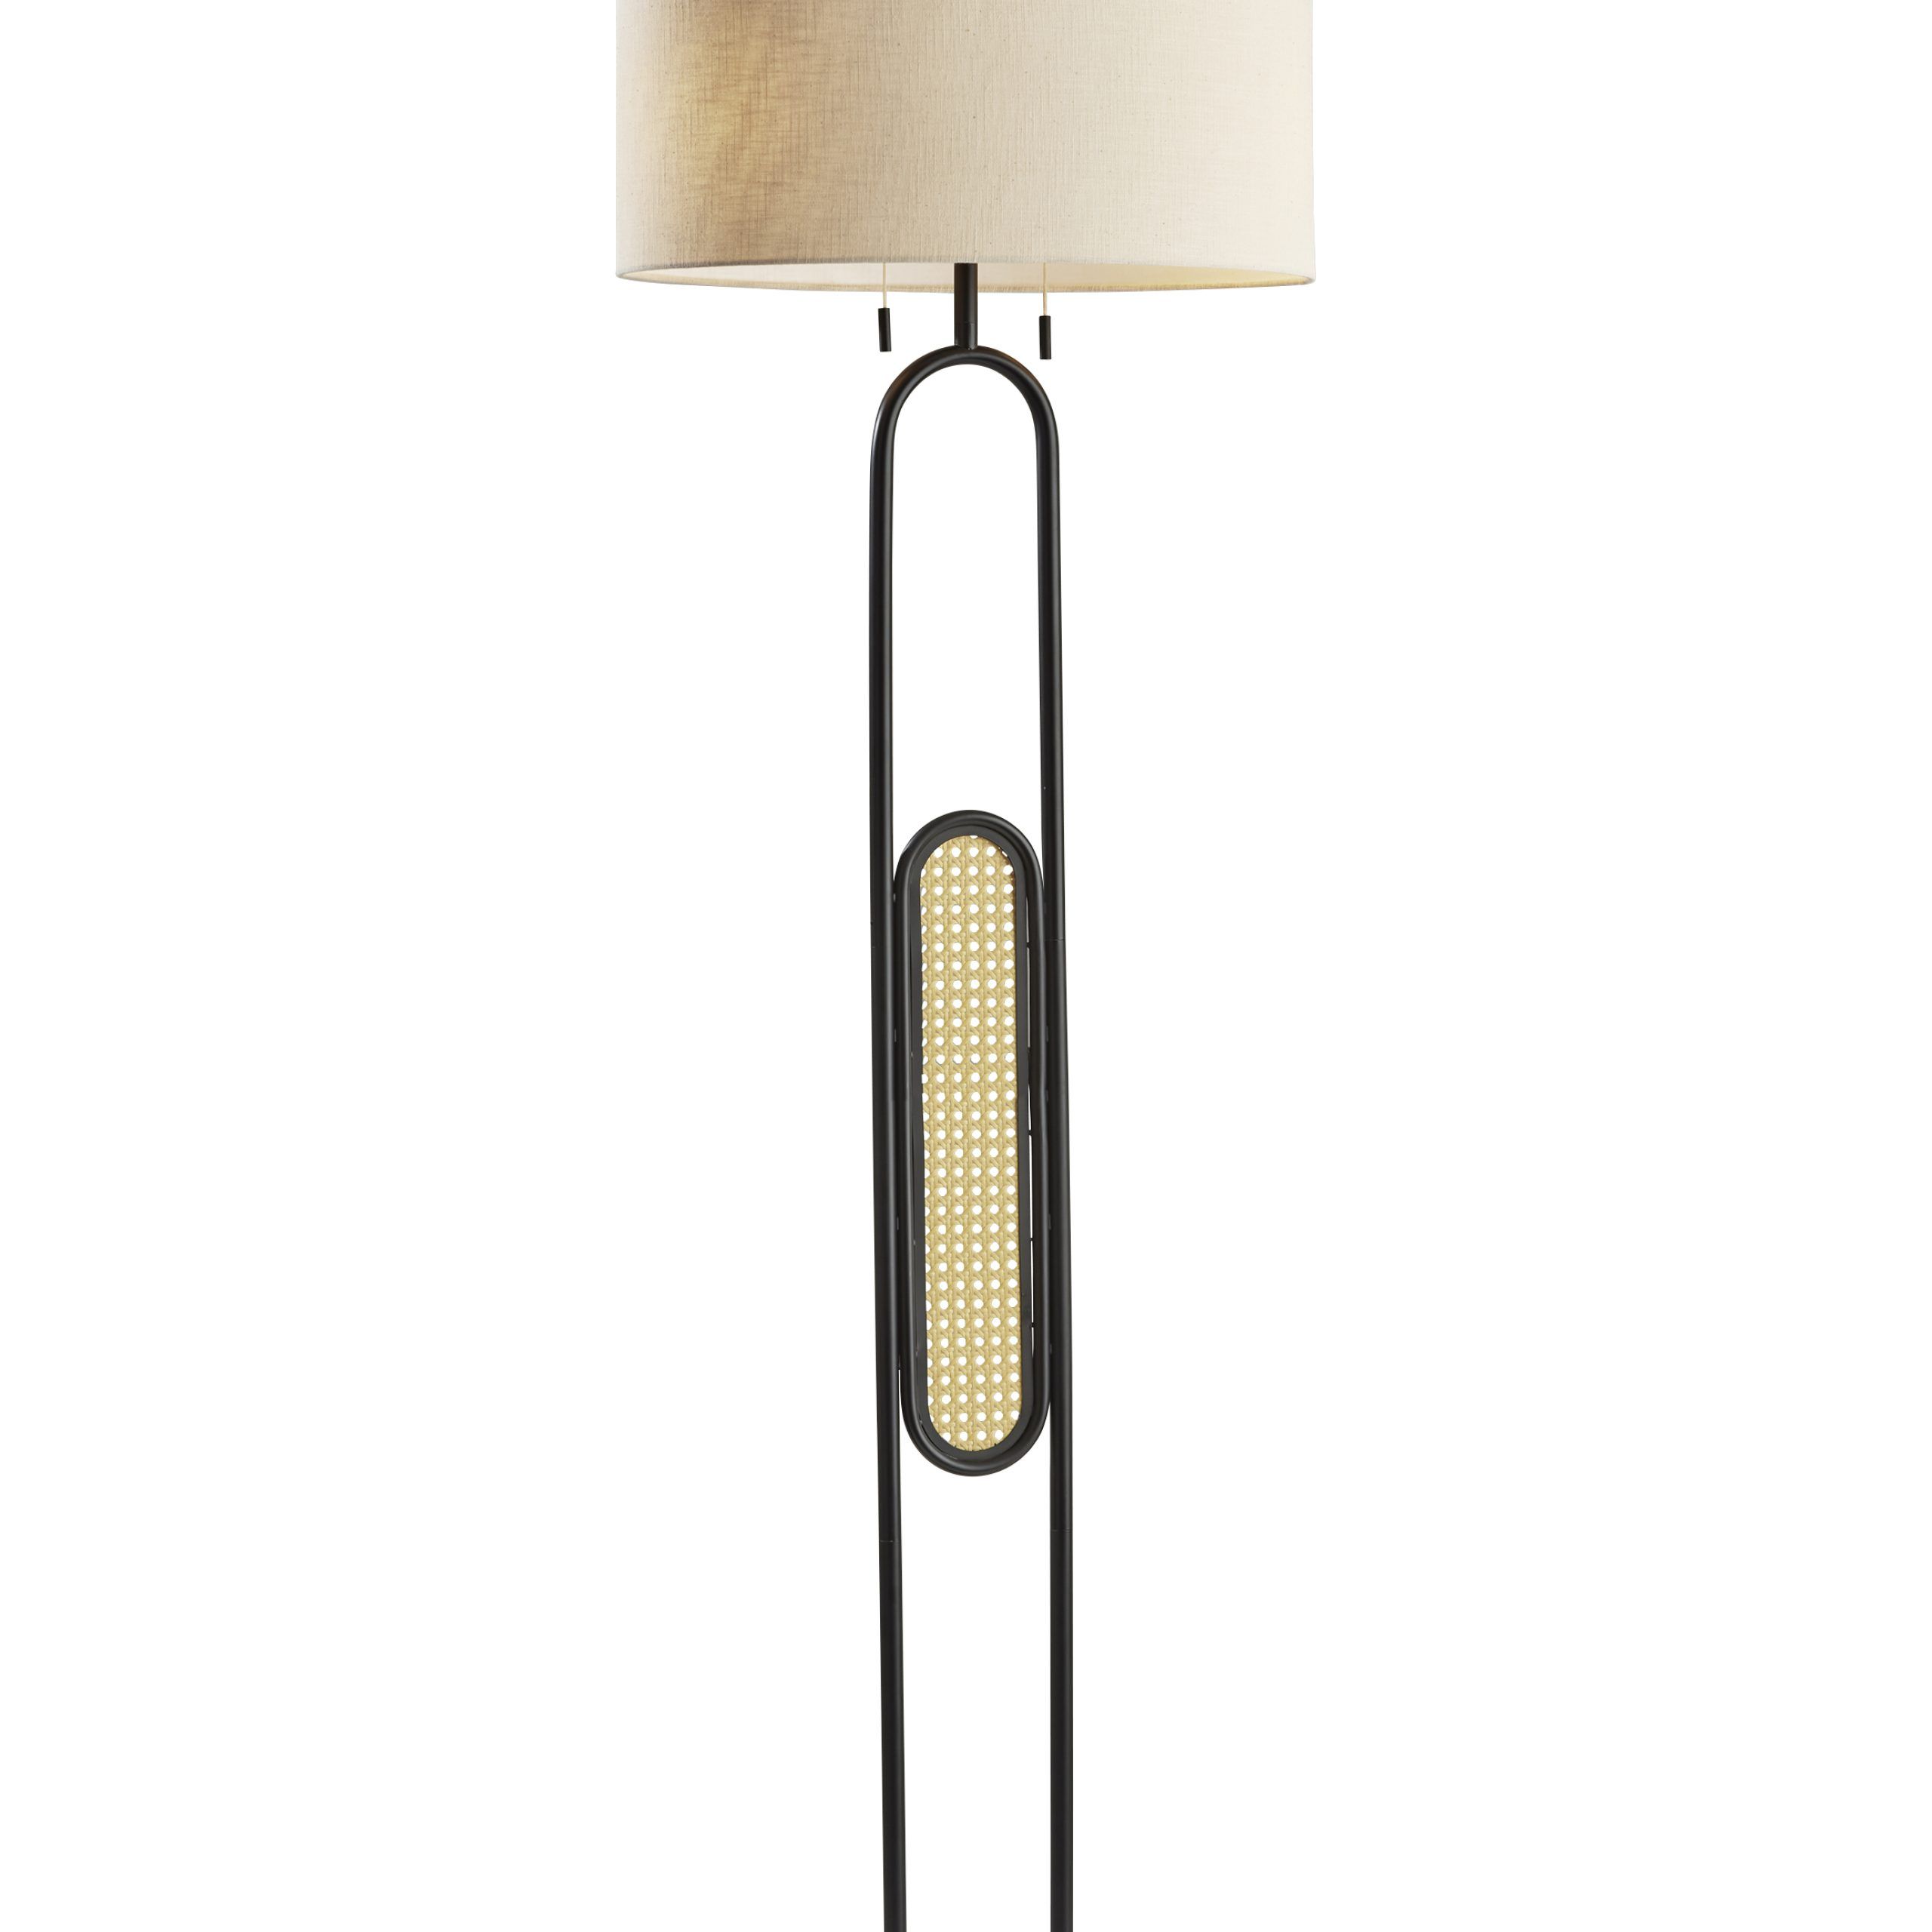 Adesso Levy Floor Lamp, Black With Webbed Caning Material, Cream Textured  Fabric Shade – Walmart Throughout Textured Fabric Floor Lamps (View 1 of 20)